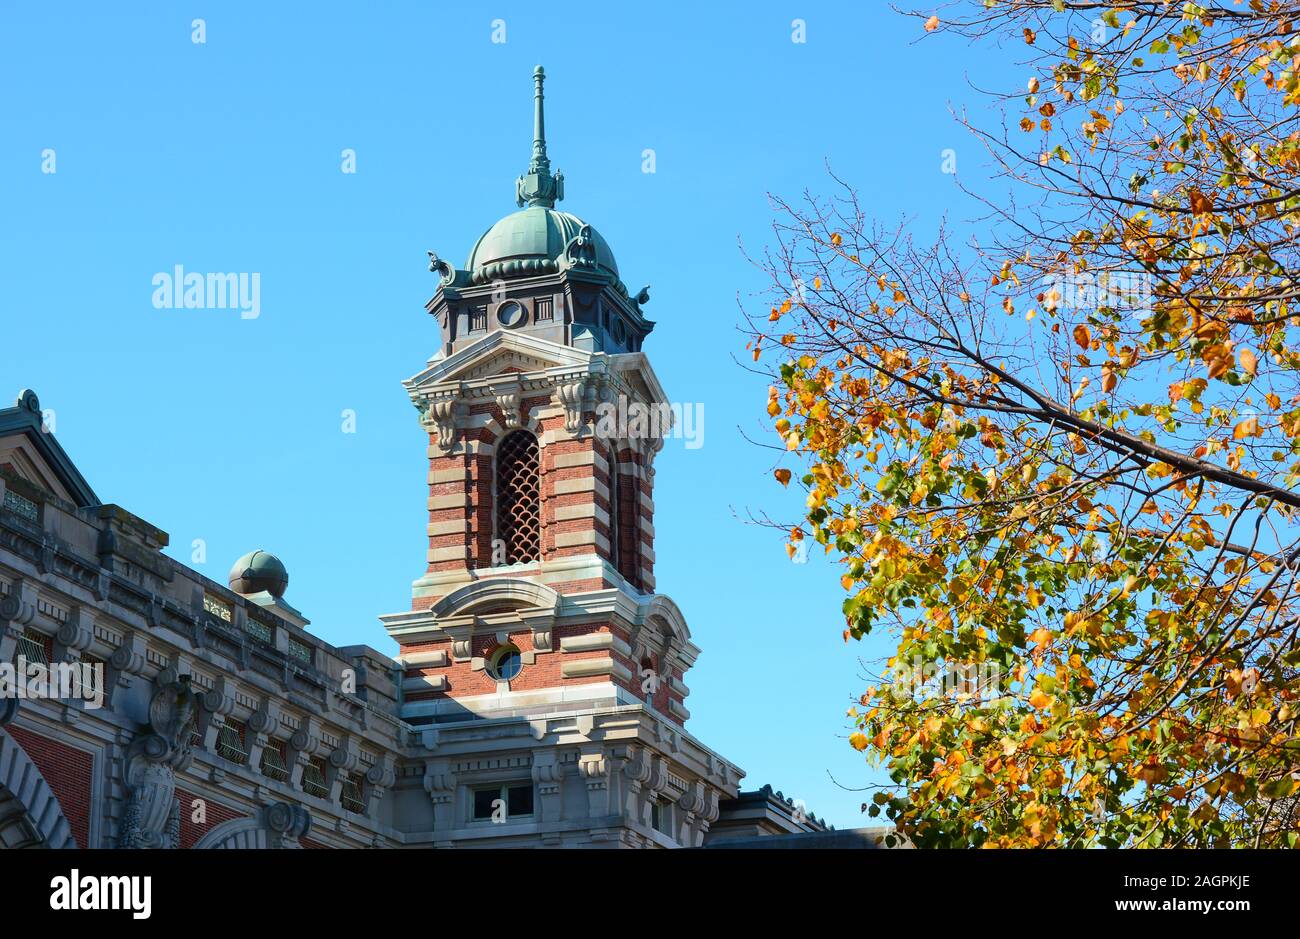 NEW YORK, NY - 04 NOV 2019: Closeup of a tower atop the National Museum of Immigration at Ellis Island with fall foliage. Stock Photo